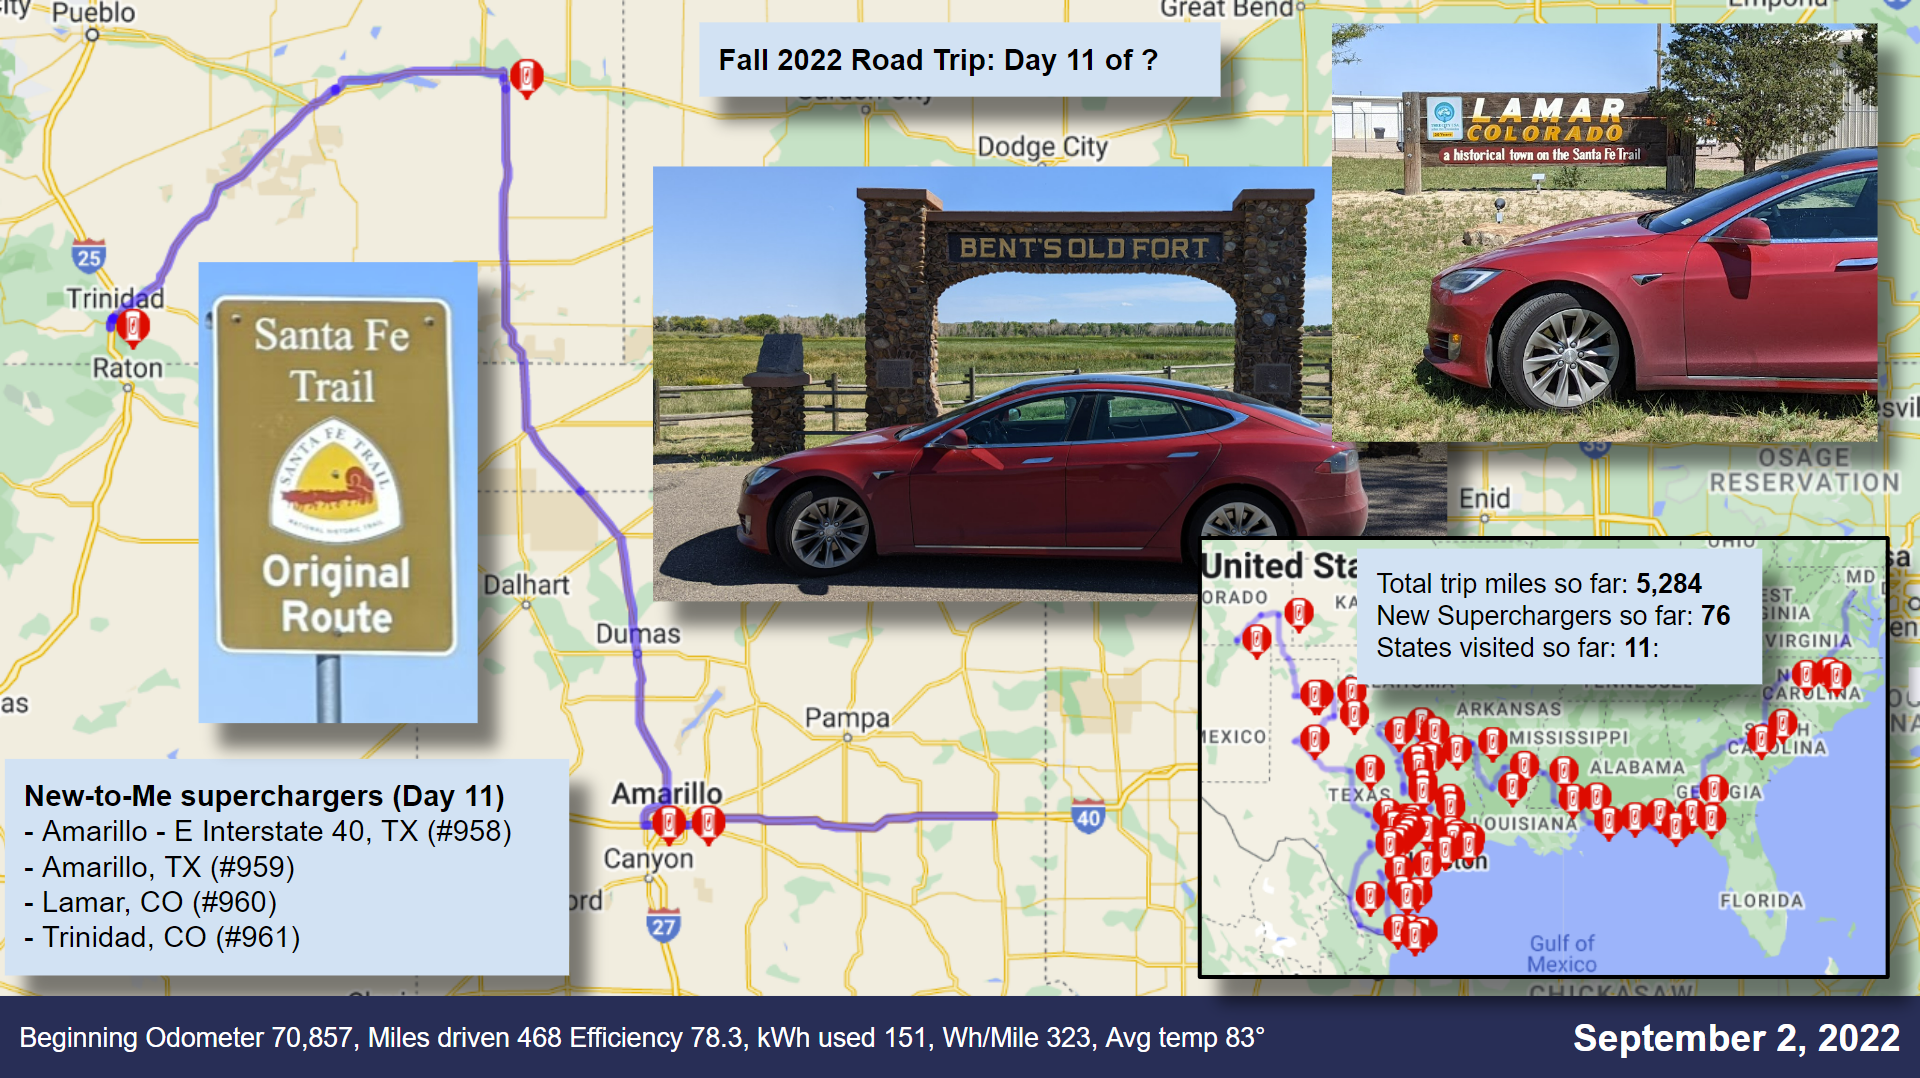 Fall 2022 road trip day 11.png